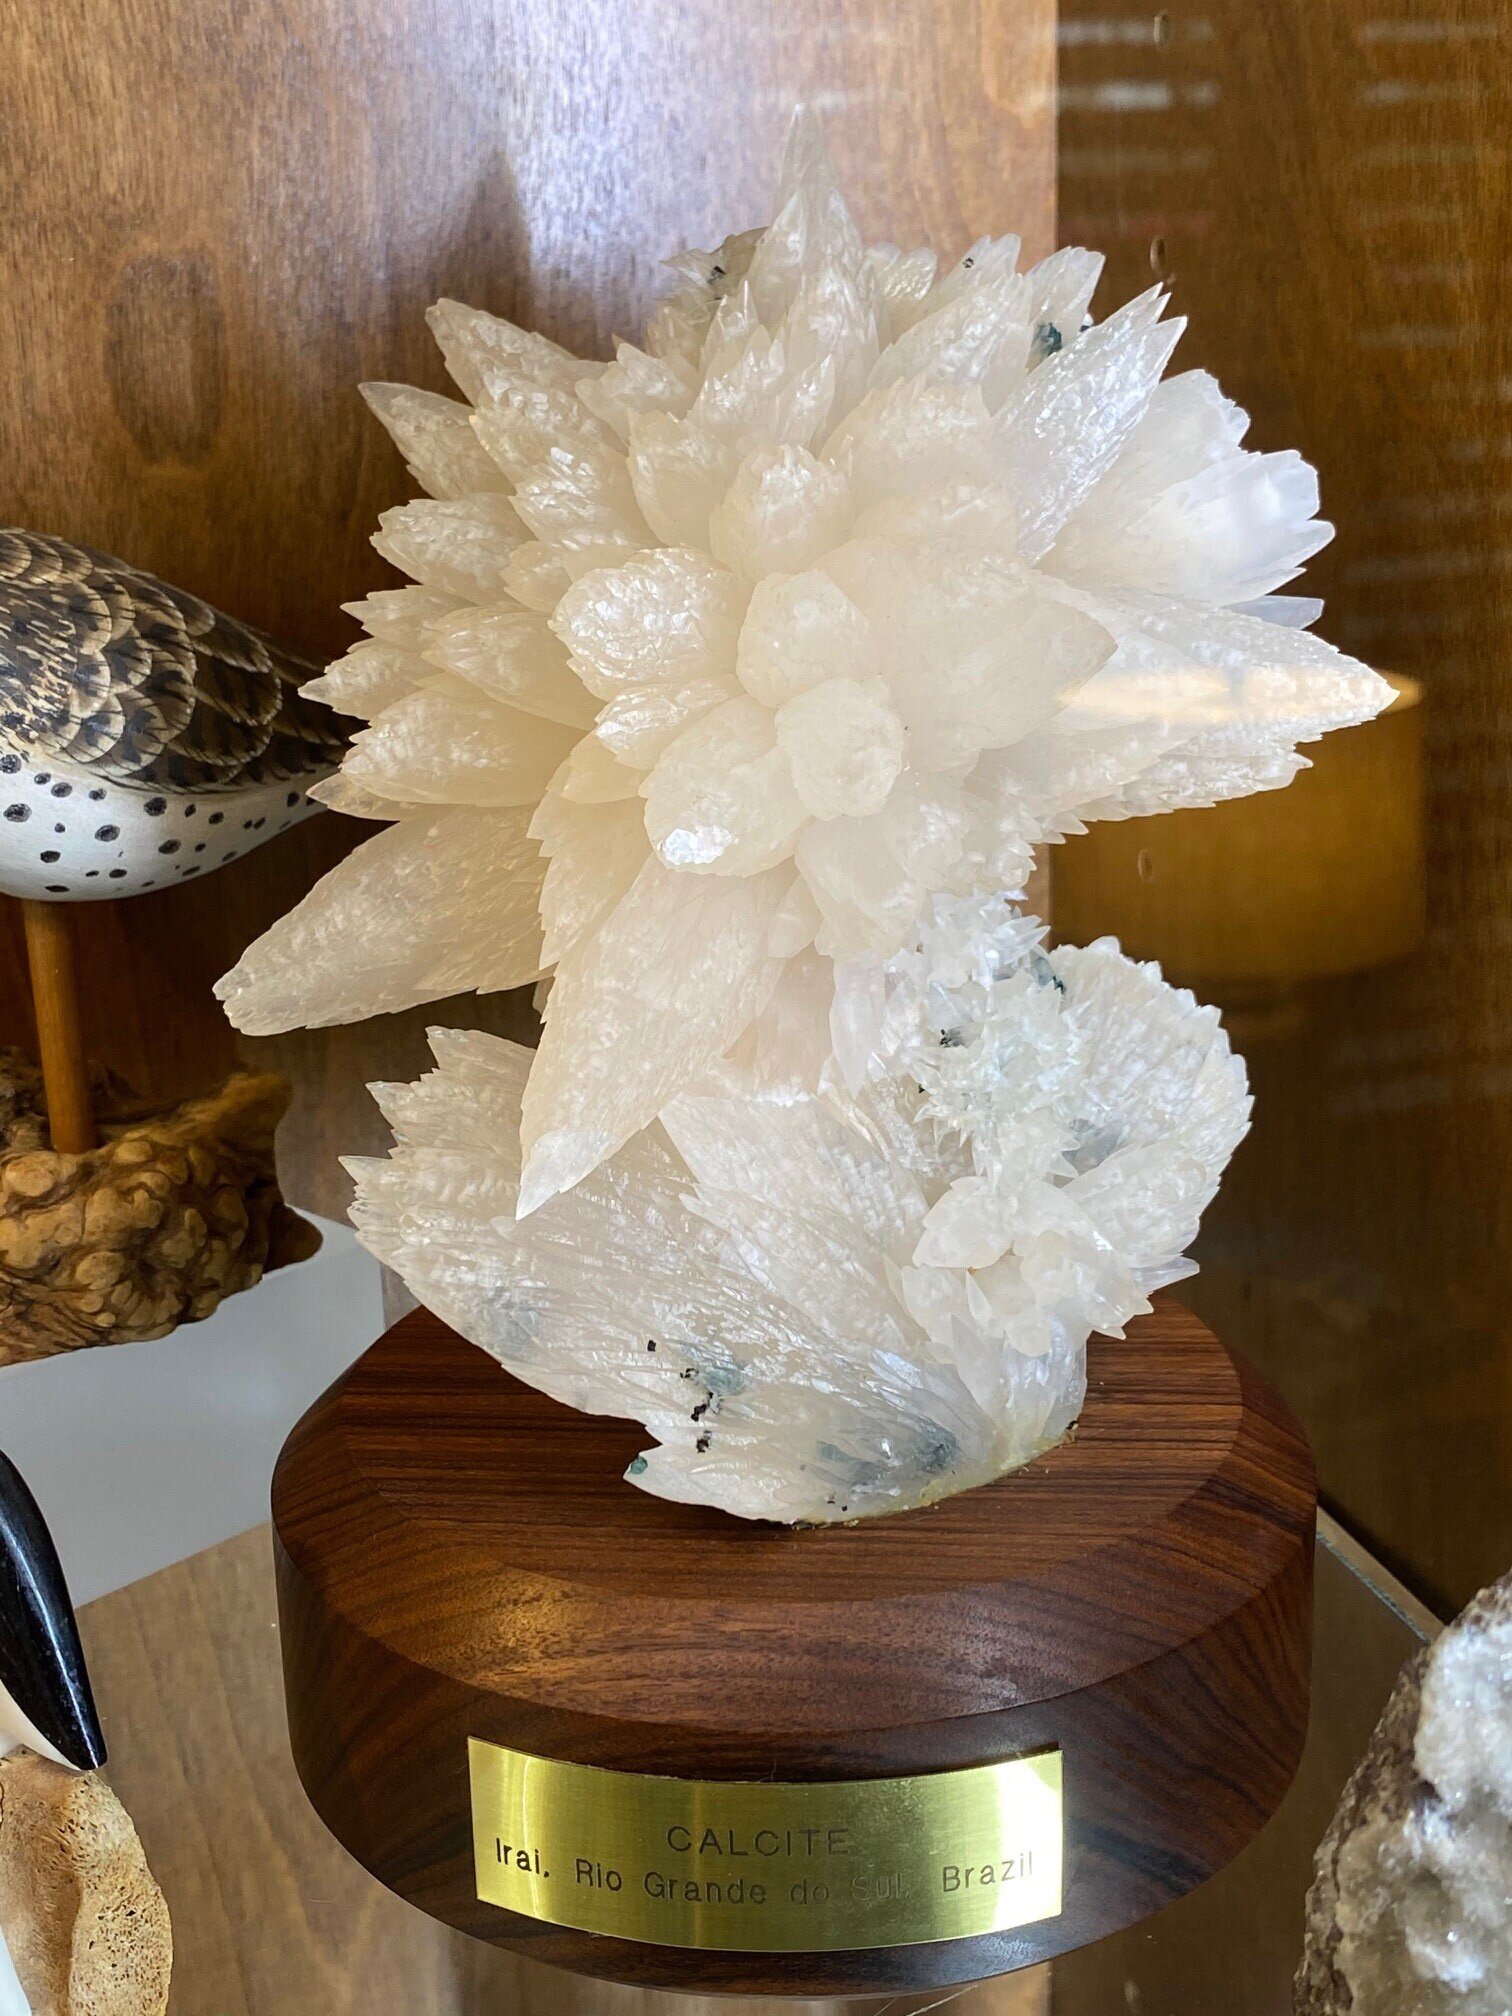 Calcite - Available